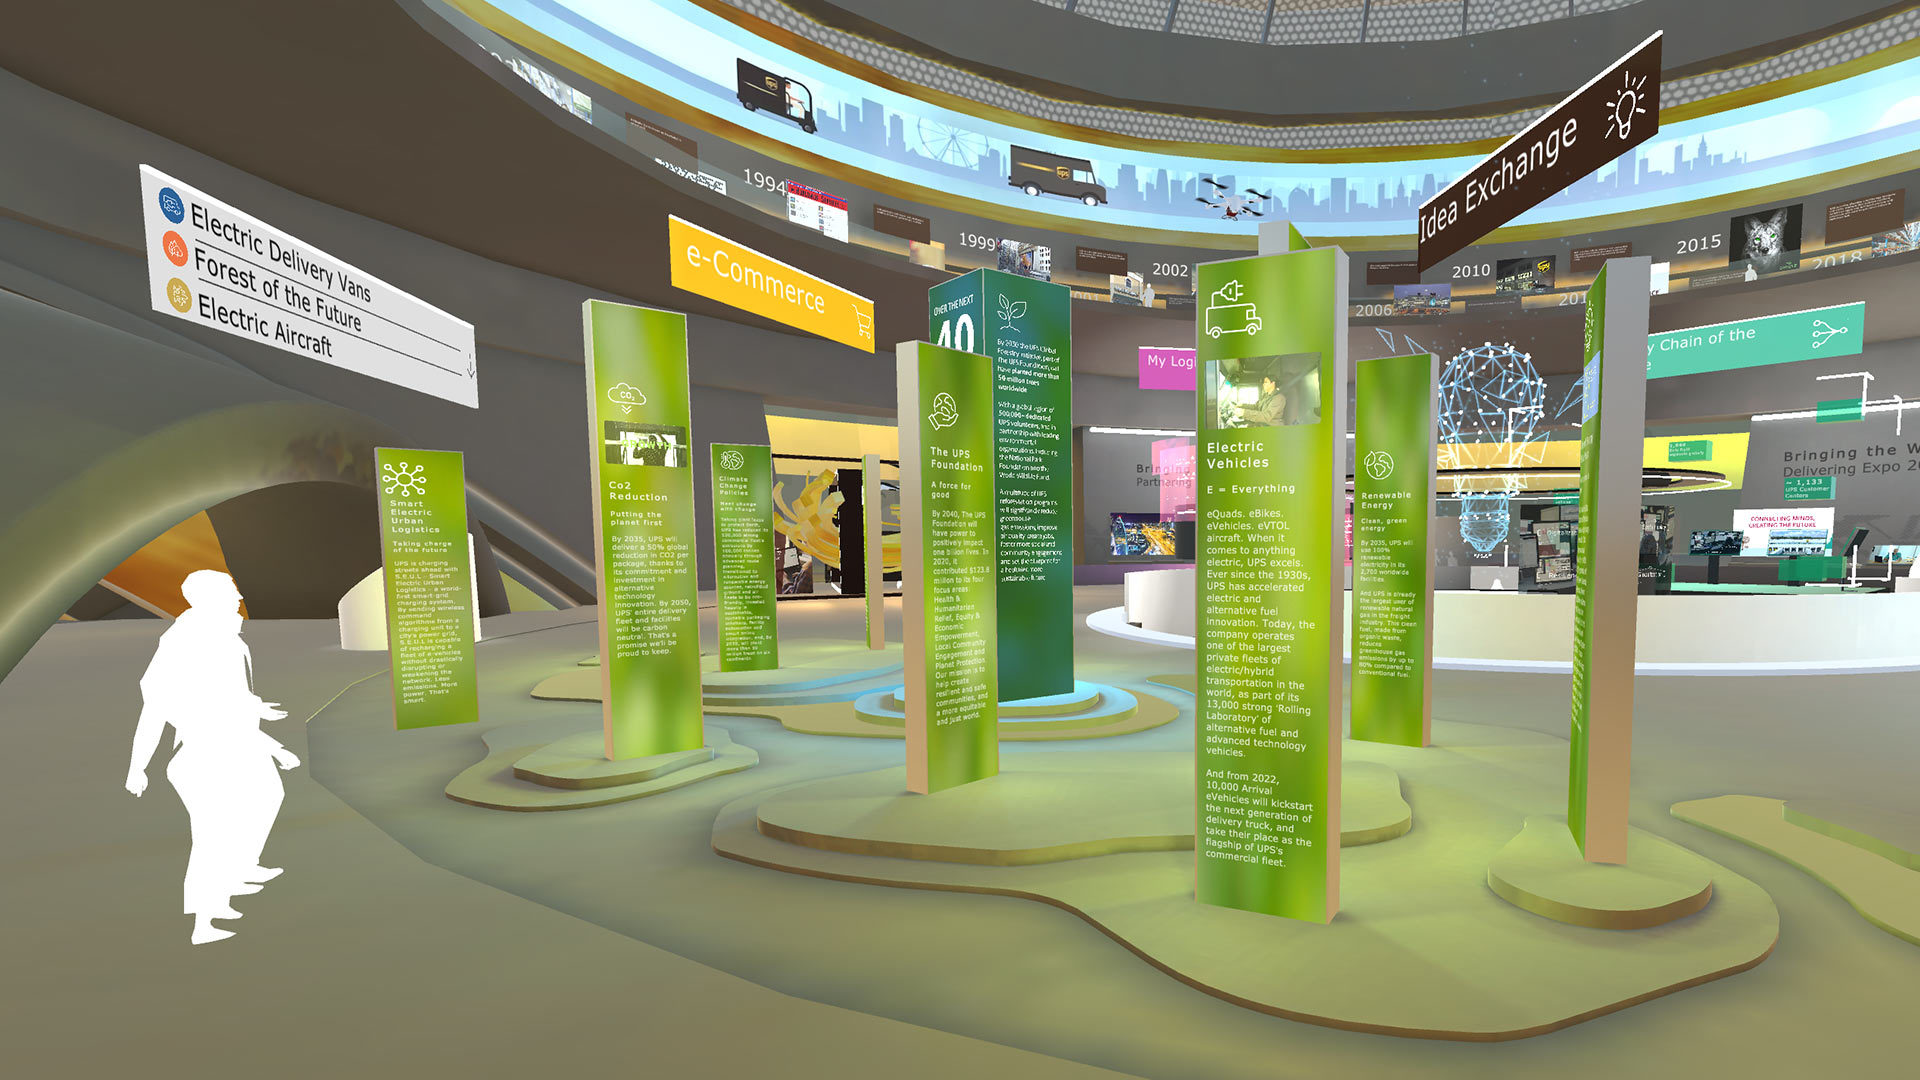 A section within the UPS Hive virtual space which has various green stands displaying information.